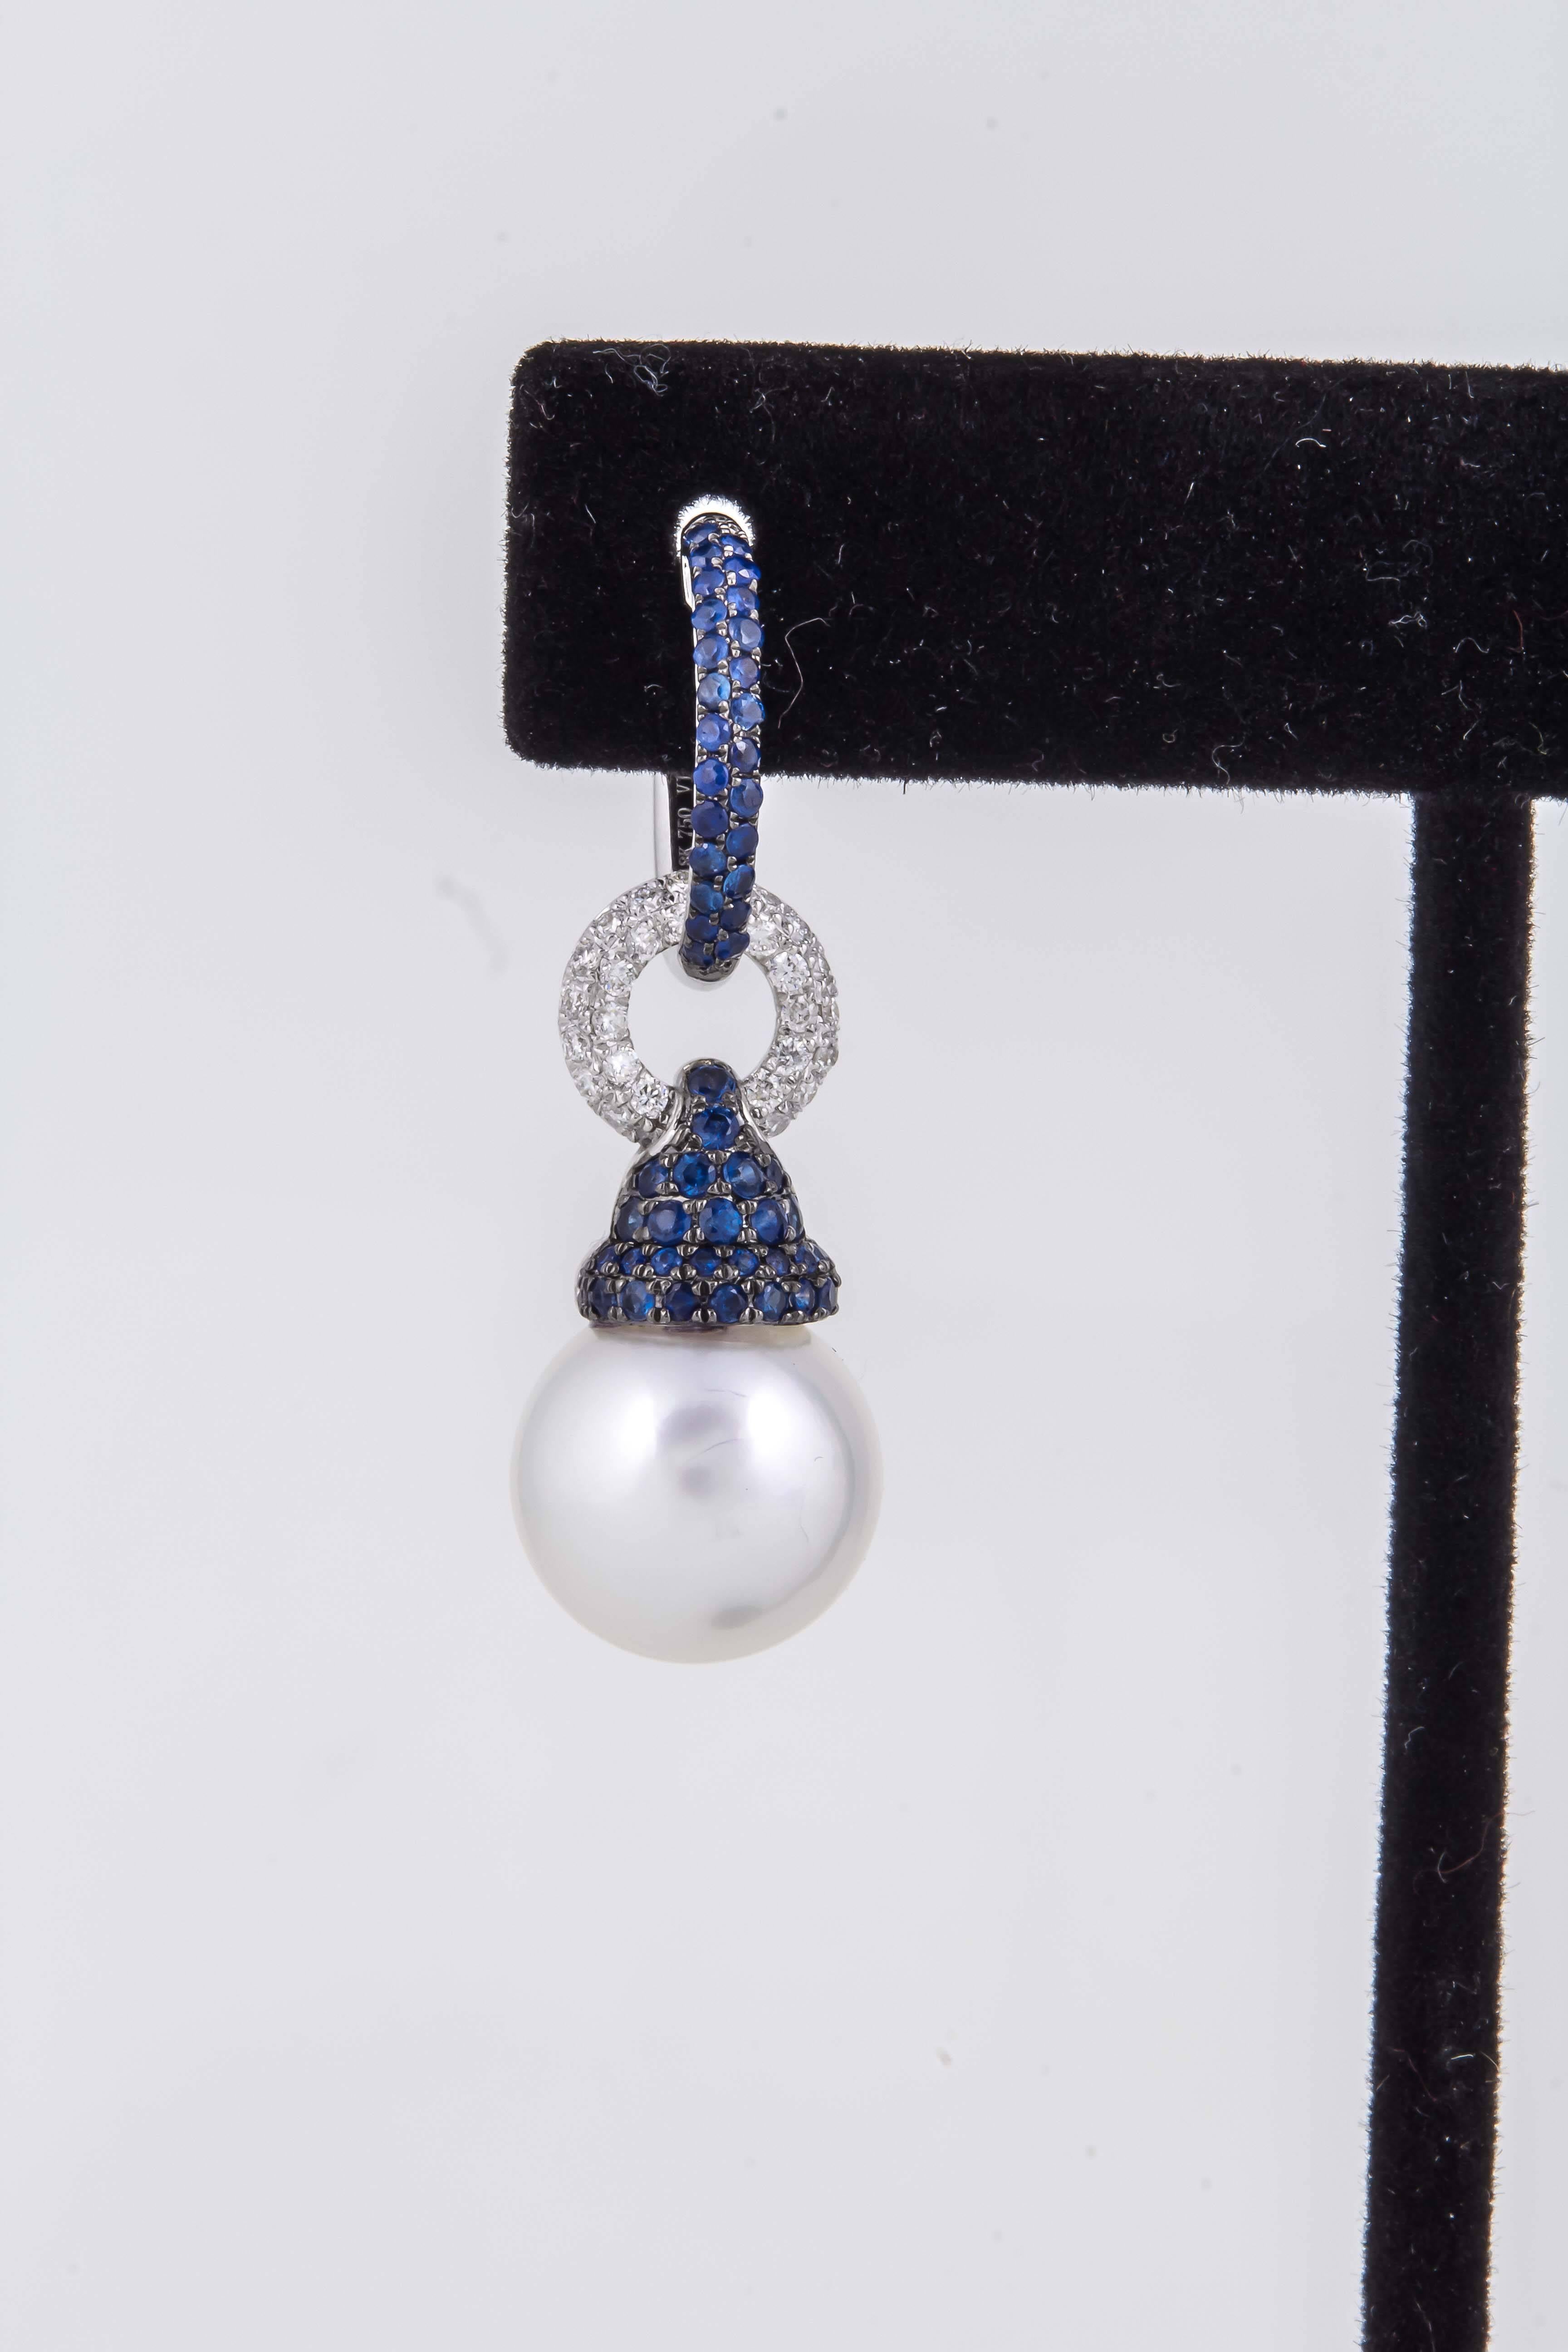 
Beautifully crafted in 18K white gold 2 south sea pearls measuring, each, 
12-13 mm with great quality and high luster.
The top hoop part can be worn separately as Huggies
Diamonds: 0.52 Carats
Sapphires: 1.05 Carats
3.5 cm long